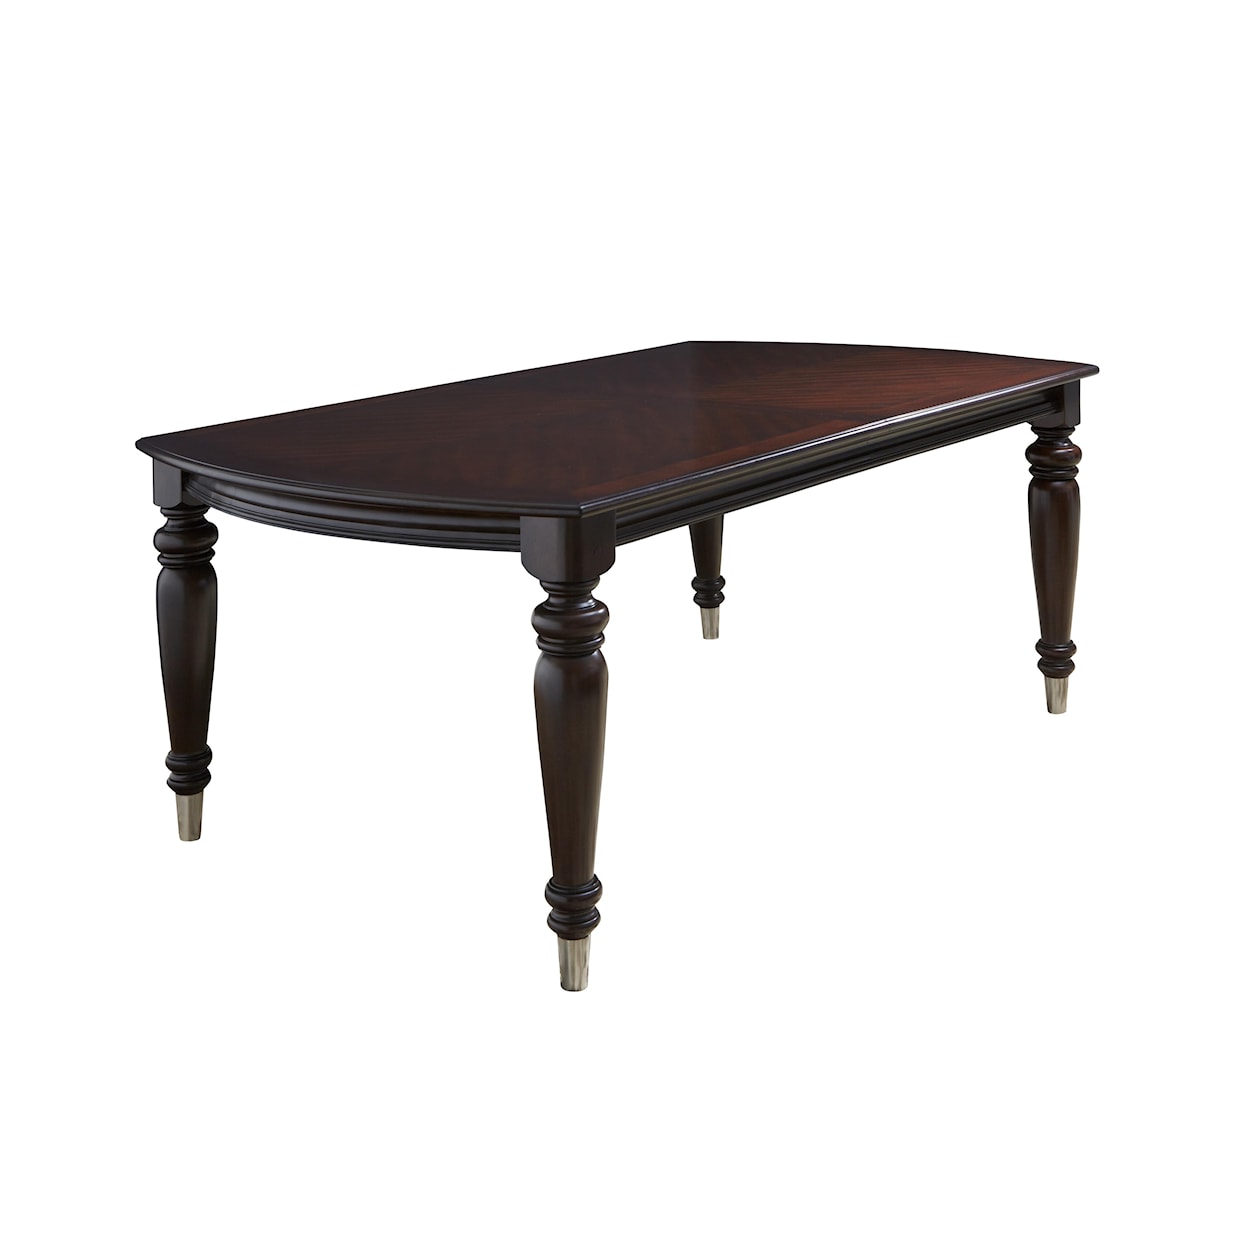 Avalon Furniture Dundee Place Formal Dining Room Group